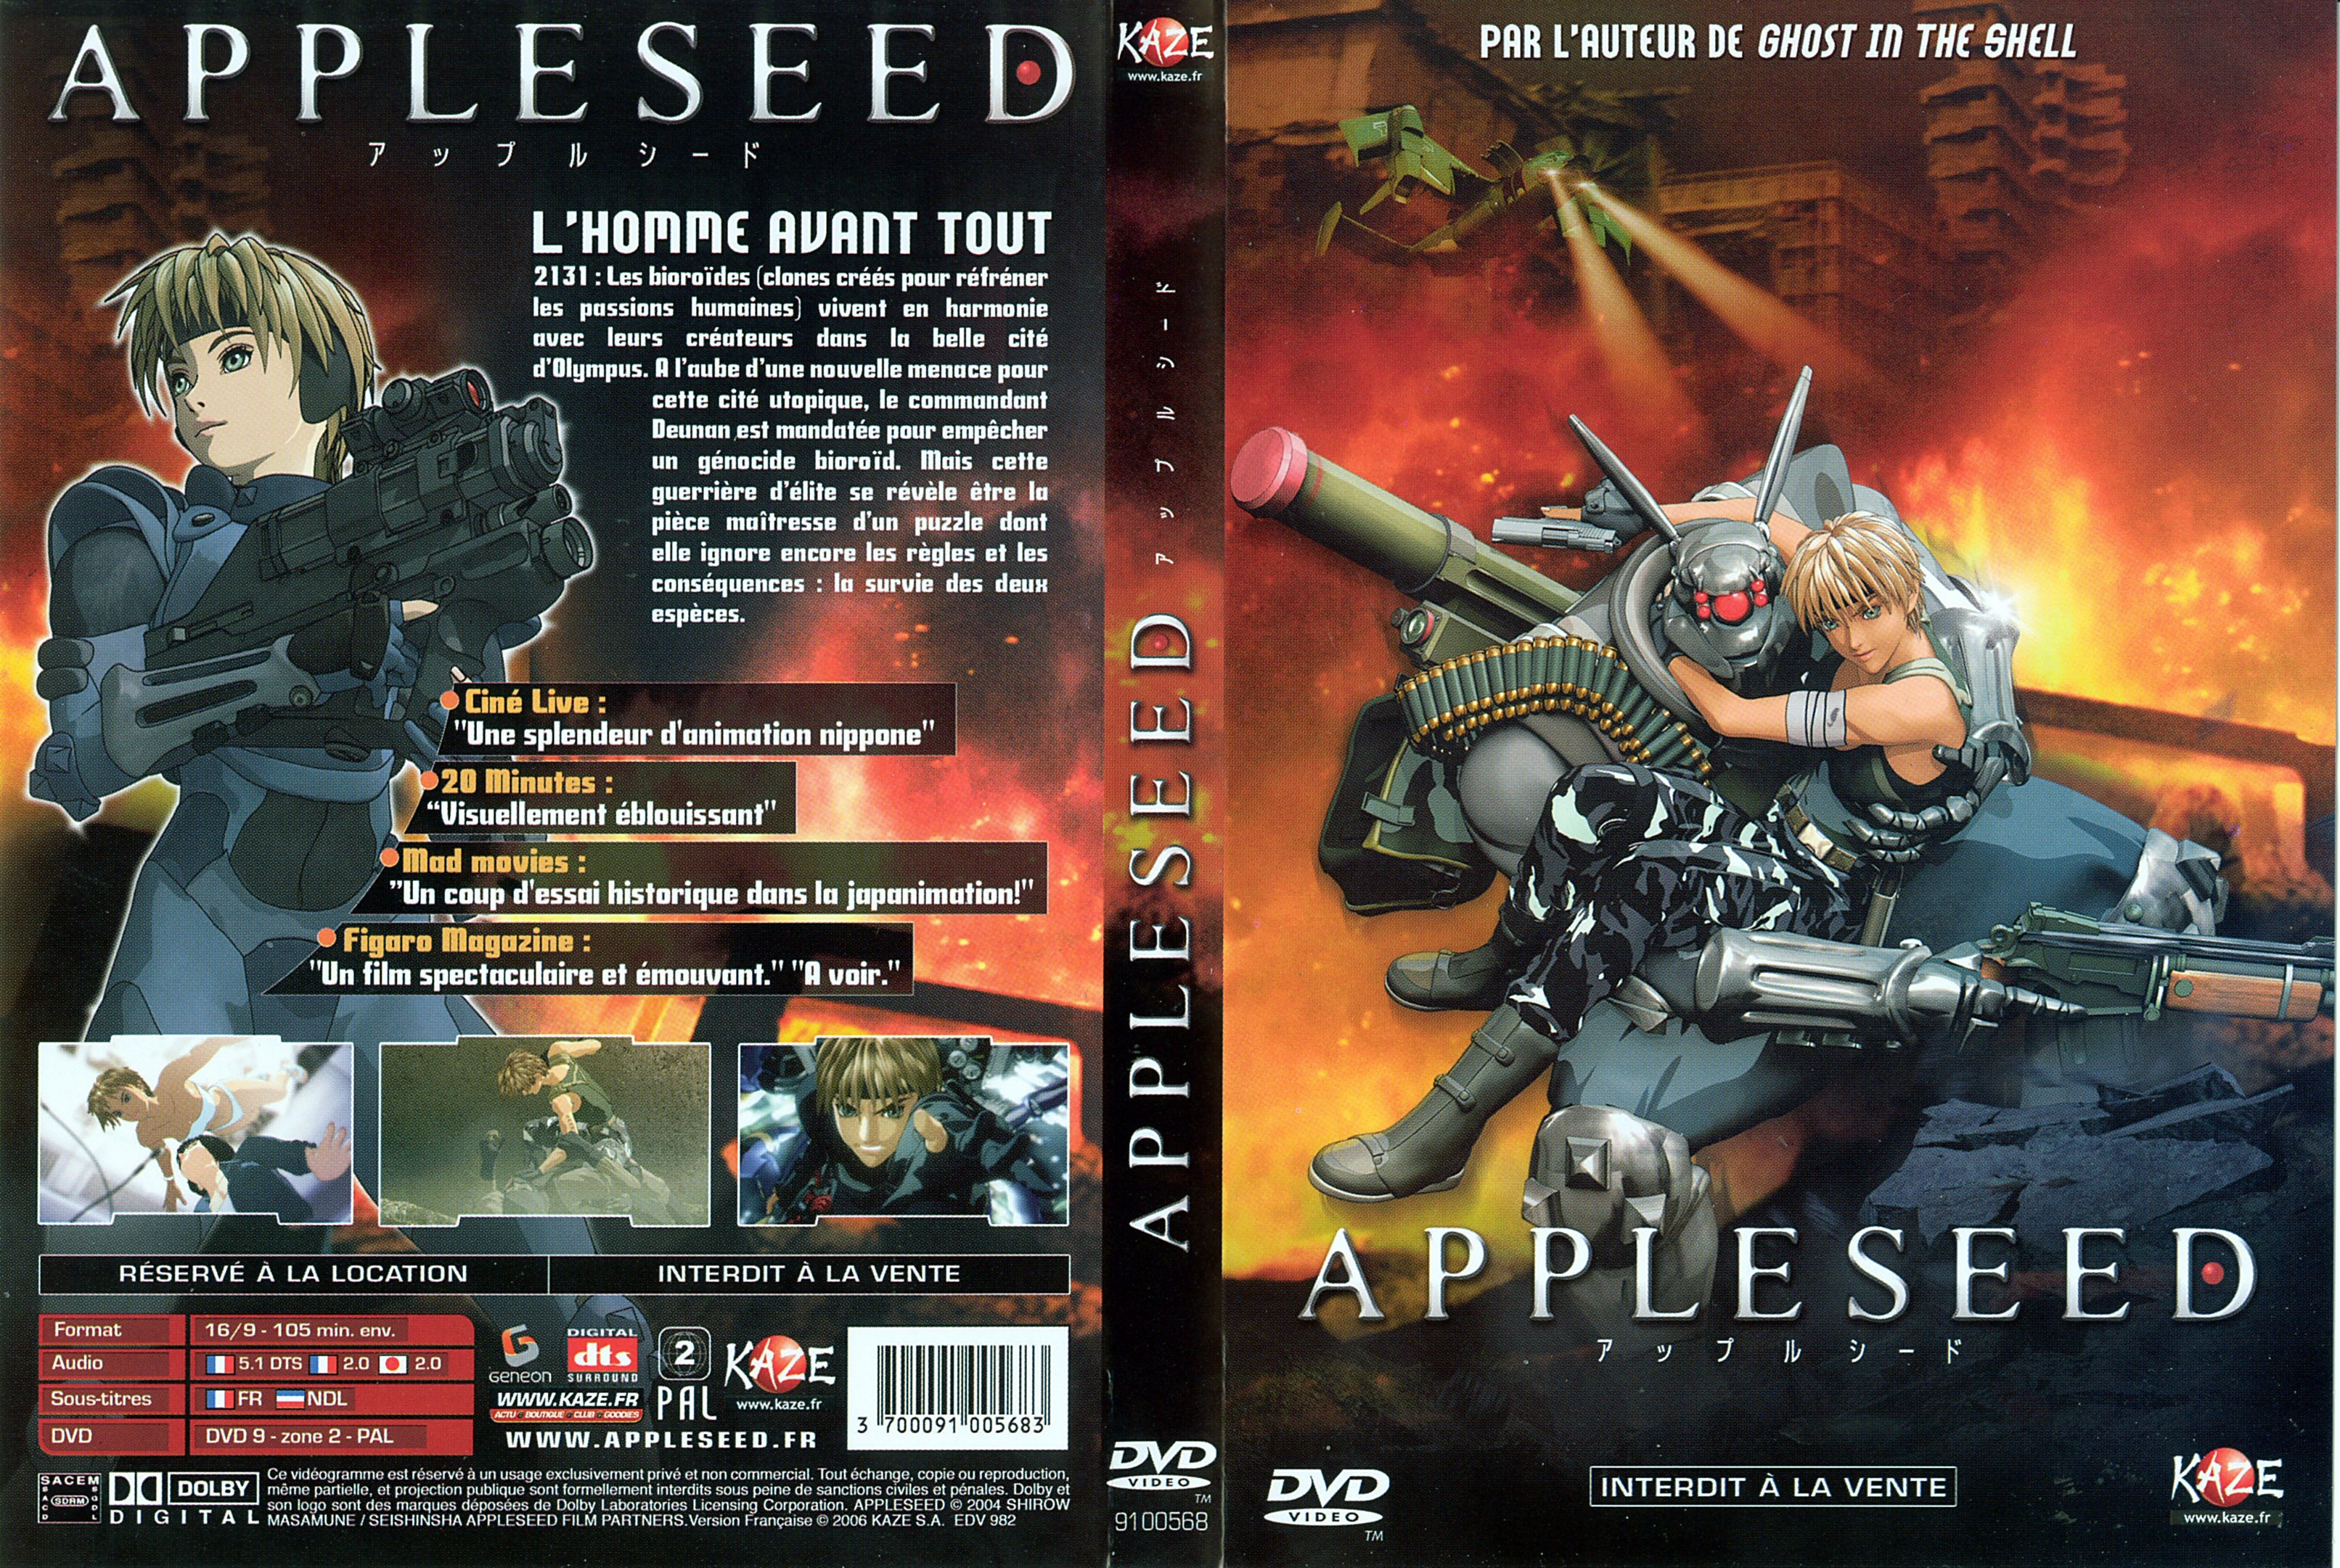 Jaquette DVD Appleseed